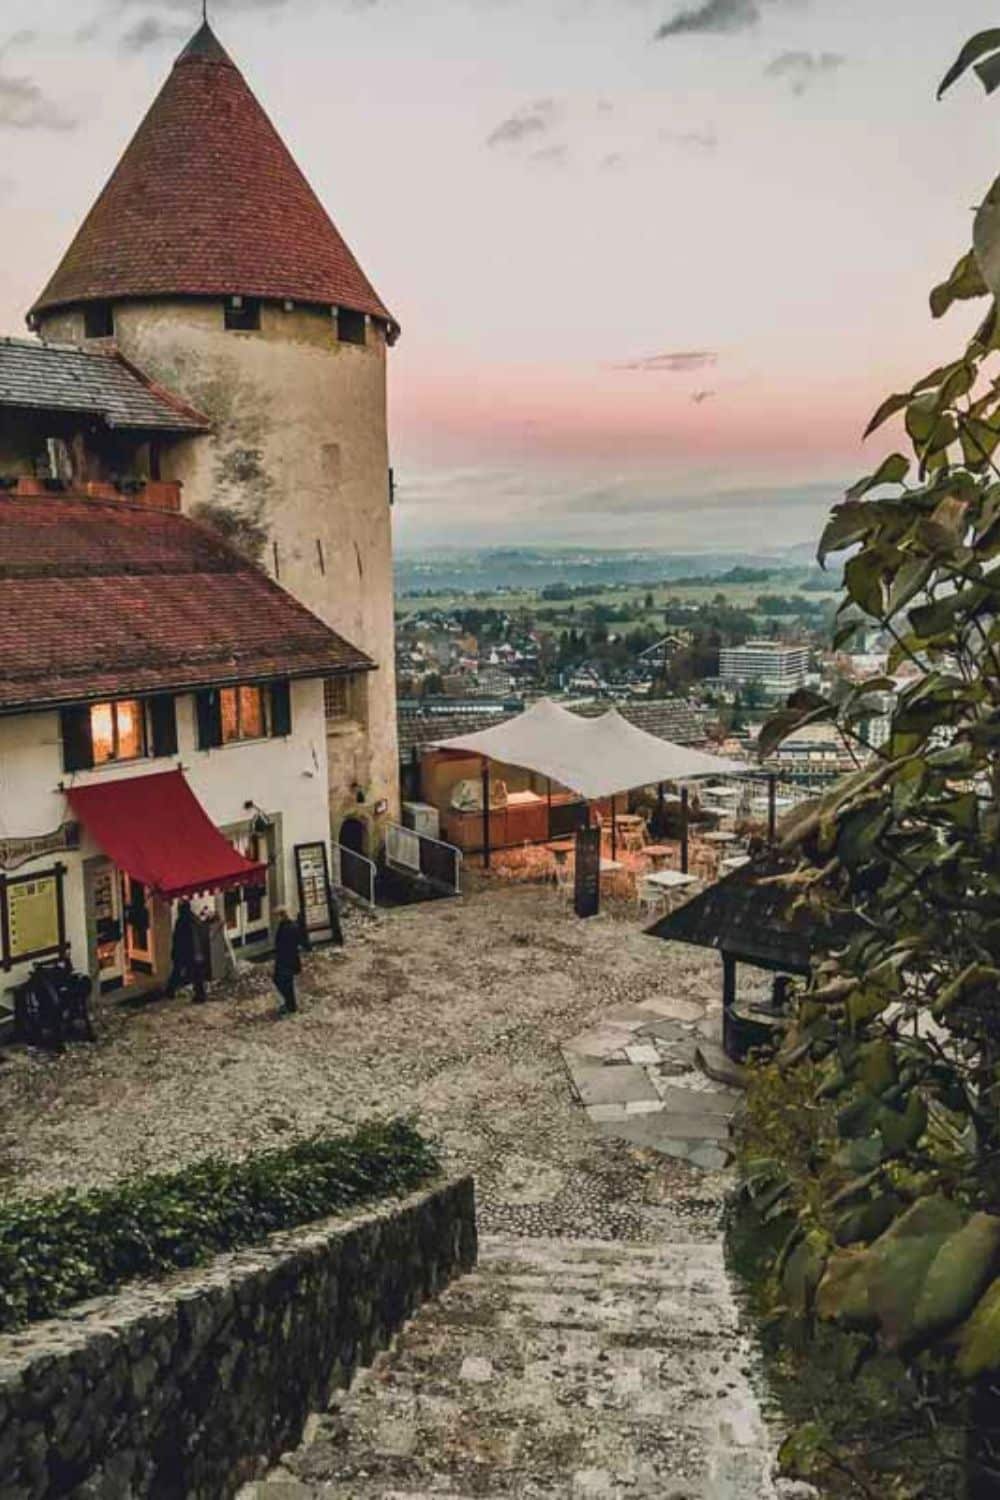 An evening view of a cobblestone courtyard with medieval buildings in Lake Bled, as the sky blushes at dusk, offering a historic ambiance for winter evening strolls.